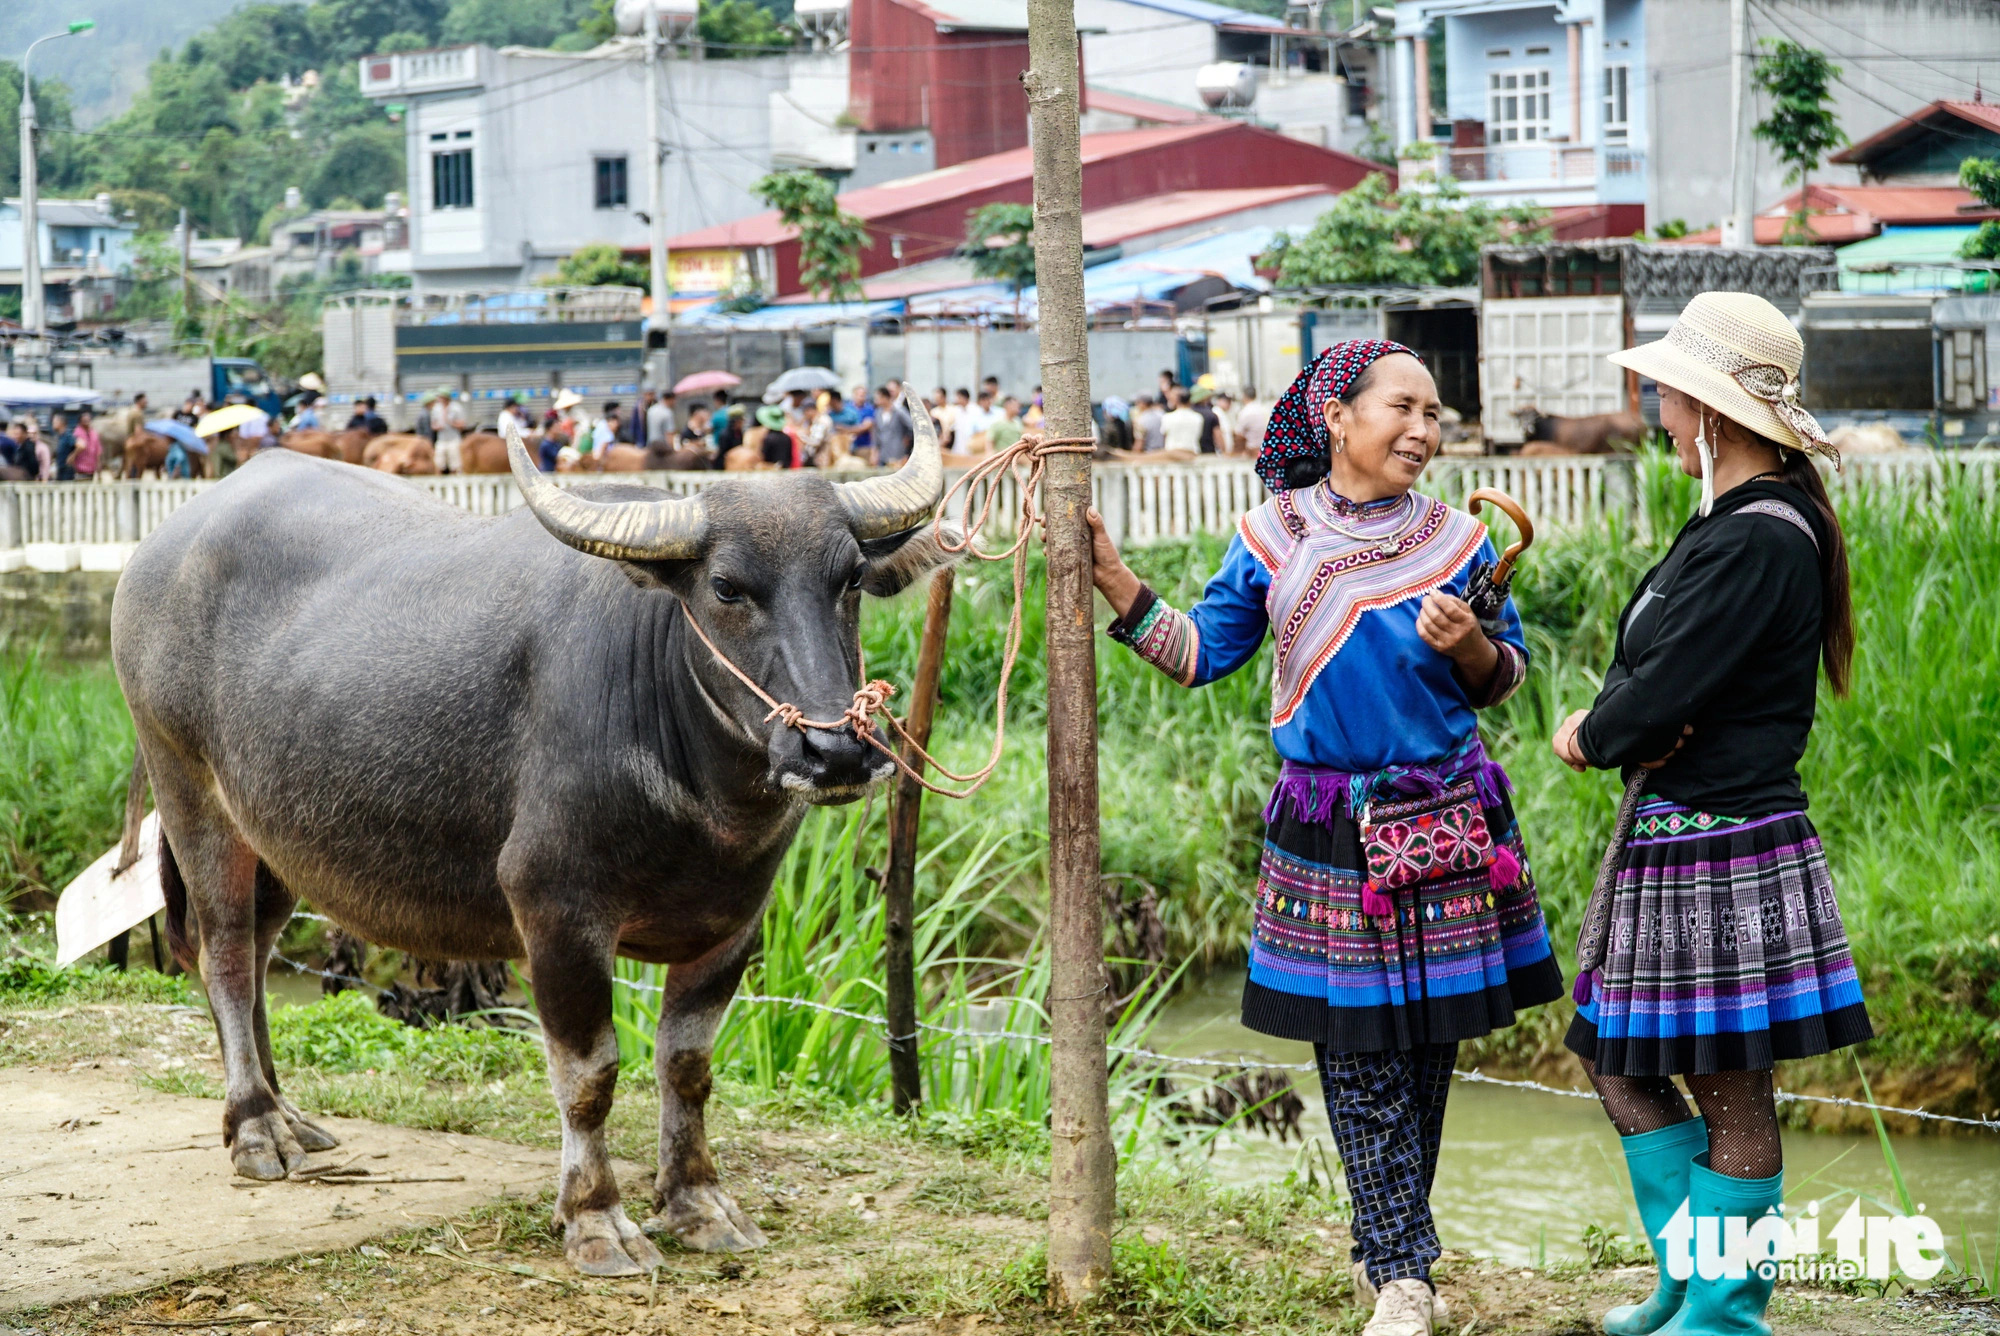 A buffalo is tethered to a pole while its owner chats with her friend at the Bac Ha cattle market in Bac Ha Town, Lao Cai Province, northern Vietnam. Photo: Nguyen Hien / Tuoi Tre